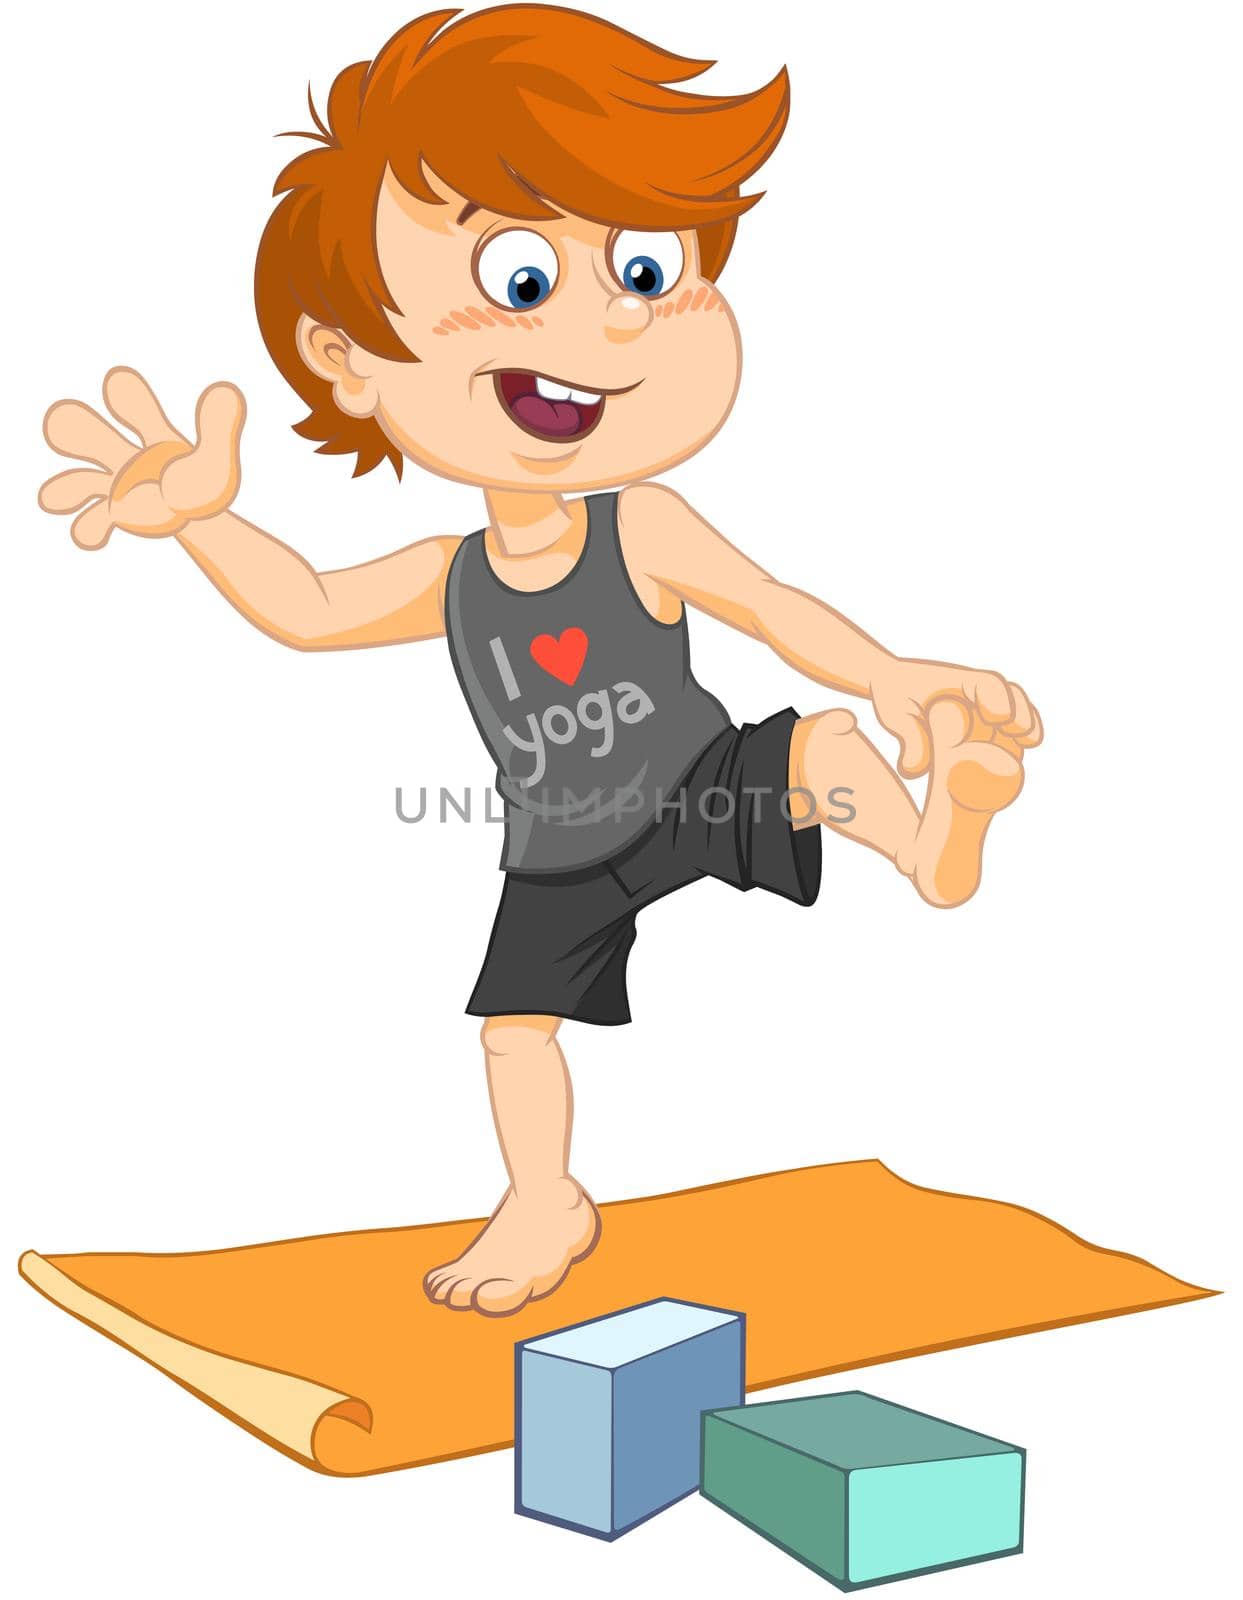 Color illustration of a cartoon  teen boy doing yoga exercise on the mat.